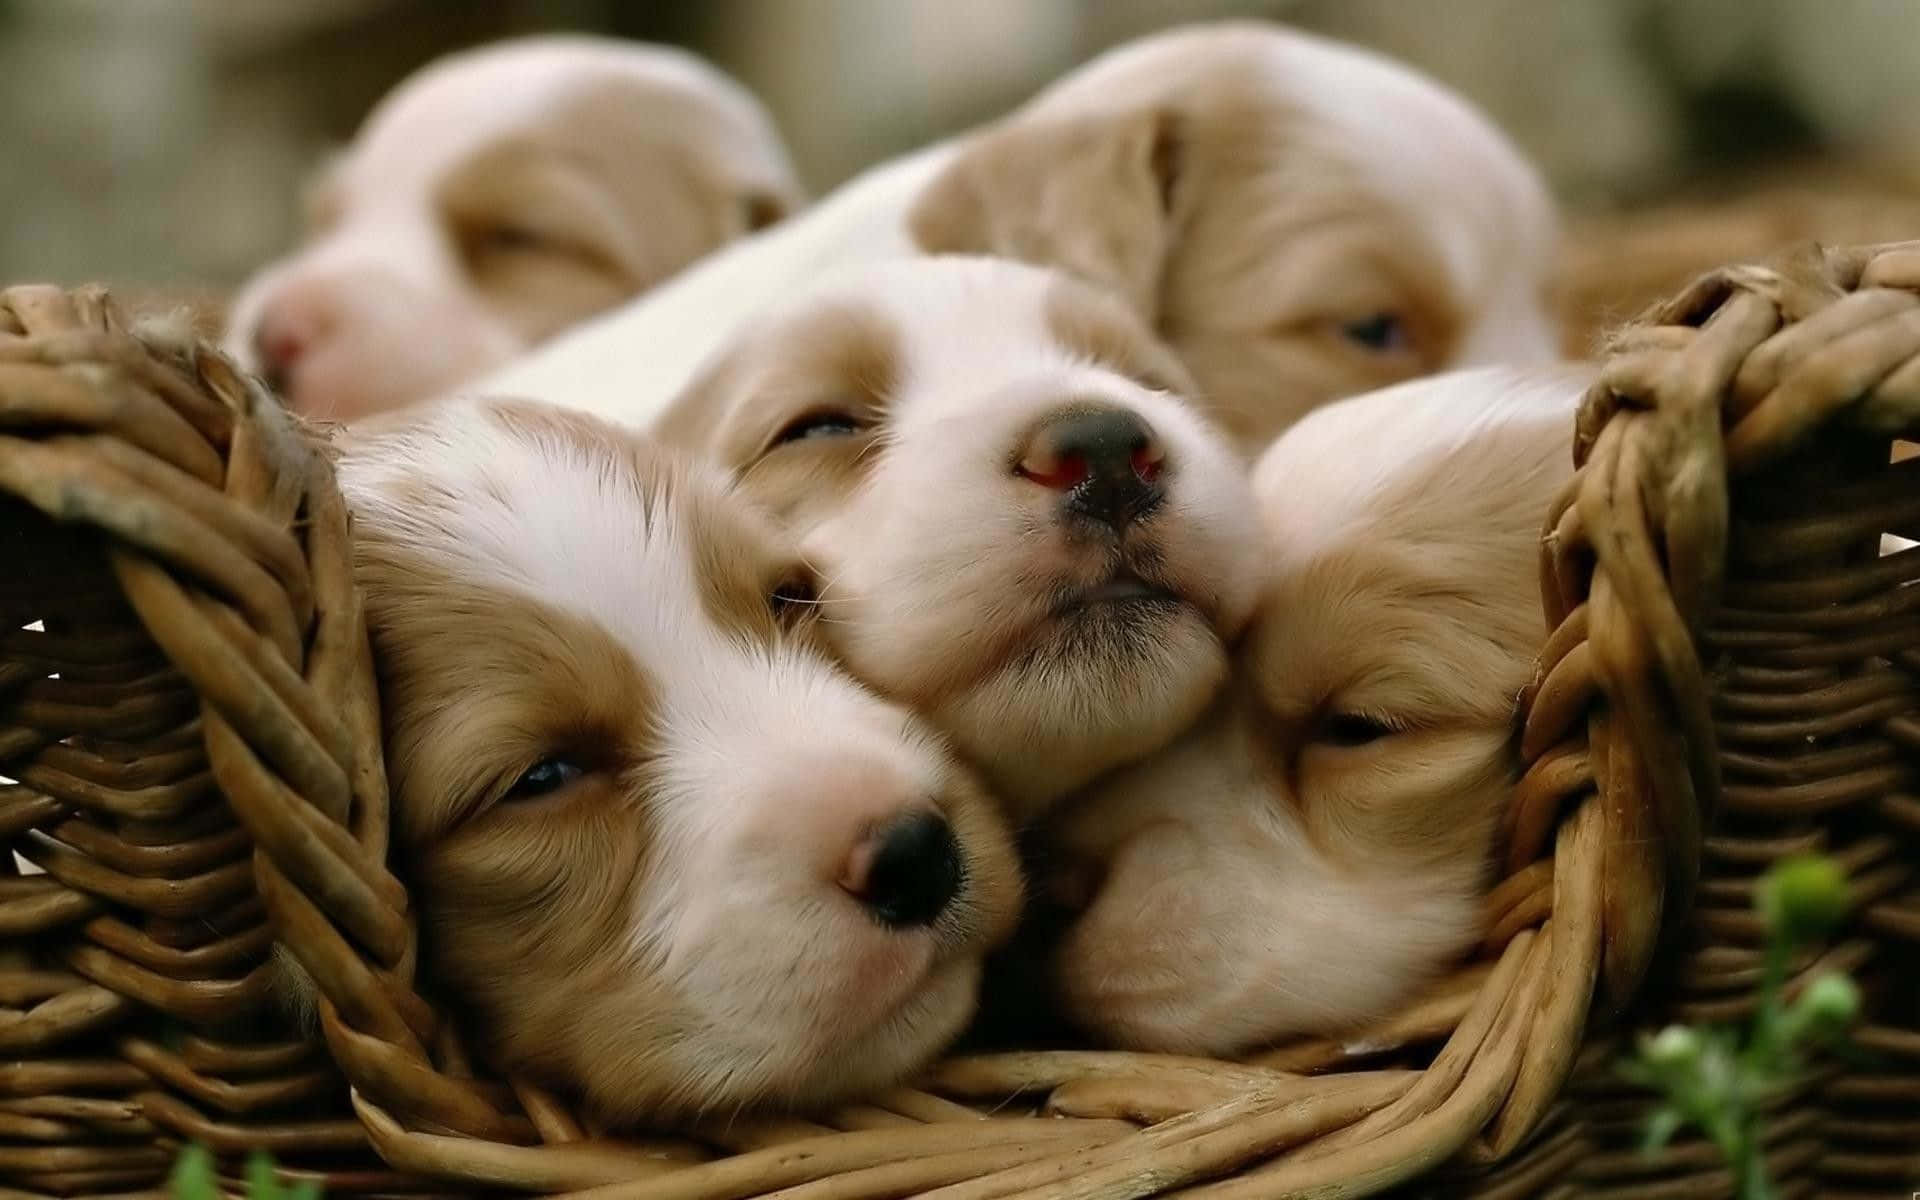 Puppies In A Basket - Hd Wallpapers